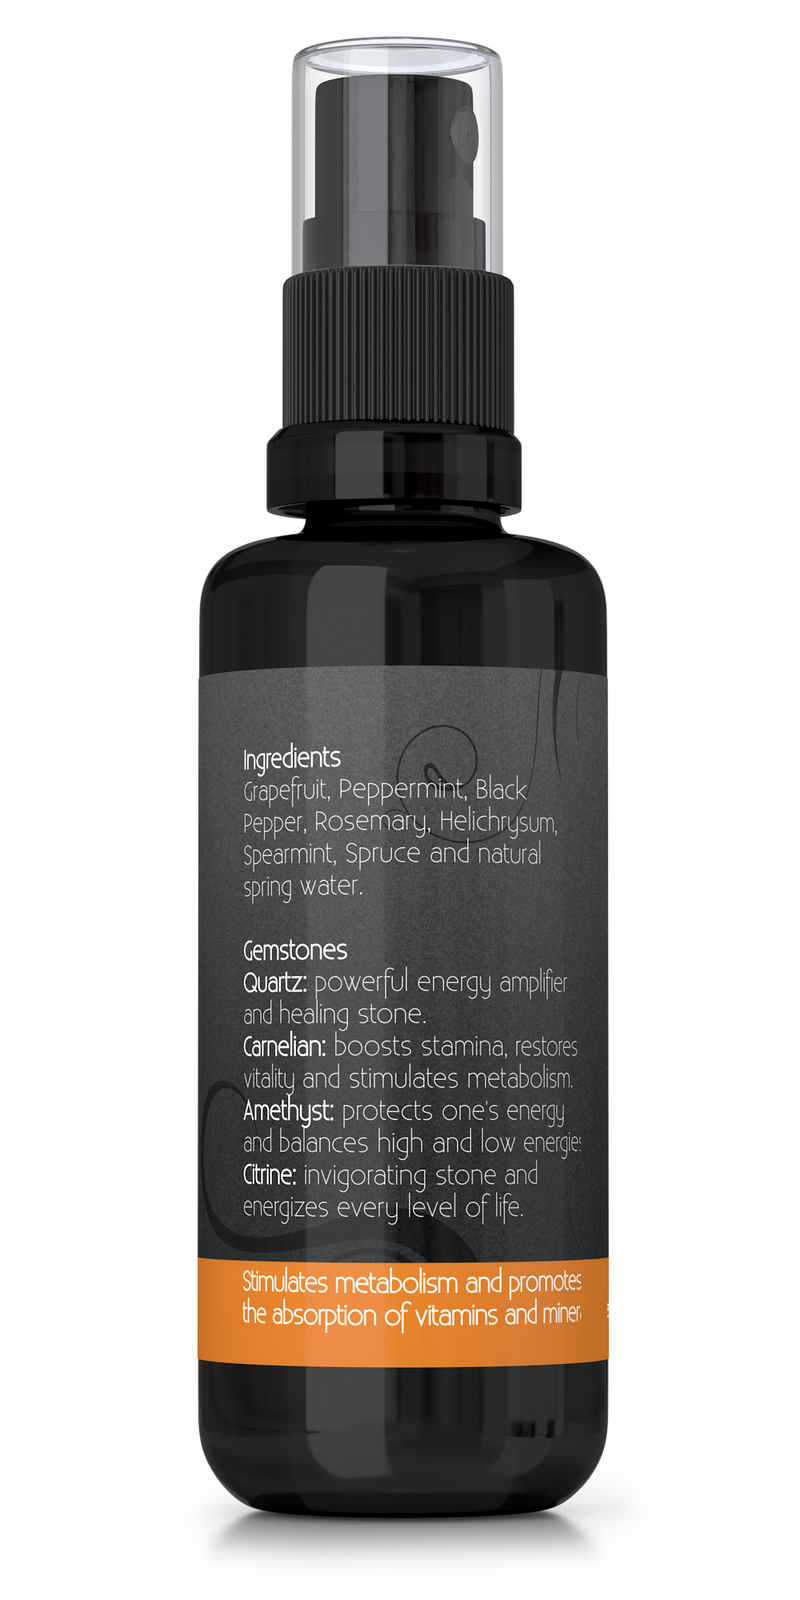 Energy aromatherapy spray with essential oils and gemstones, backside of bottle showing ingredients